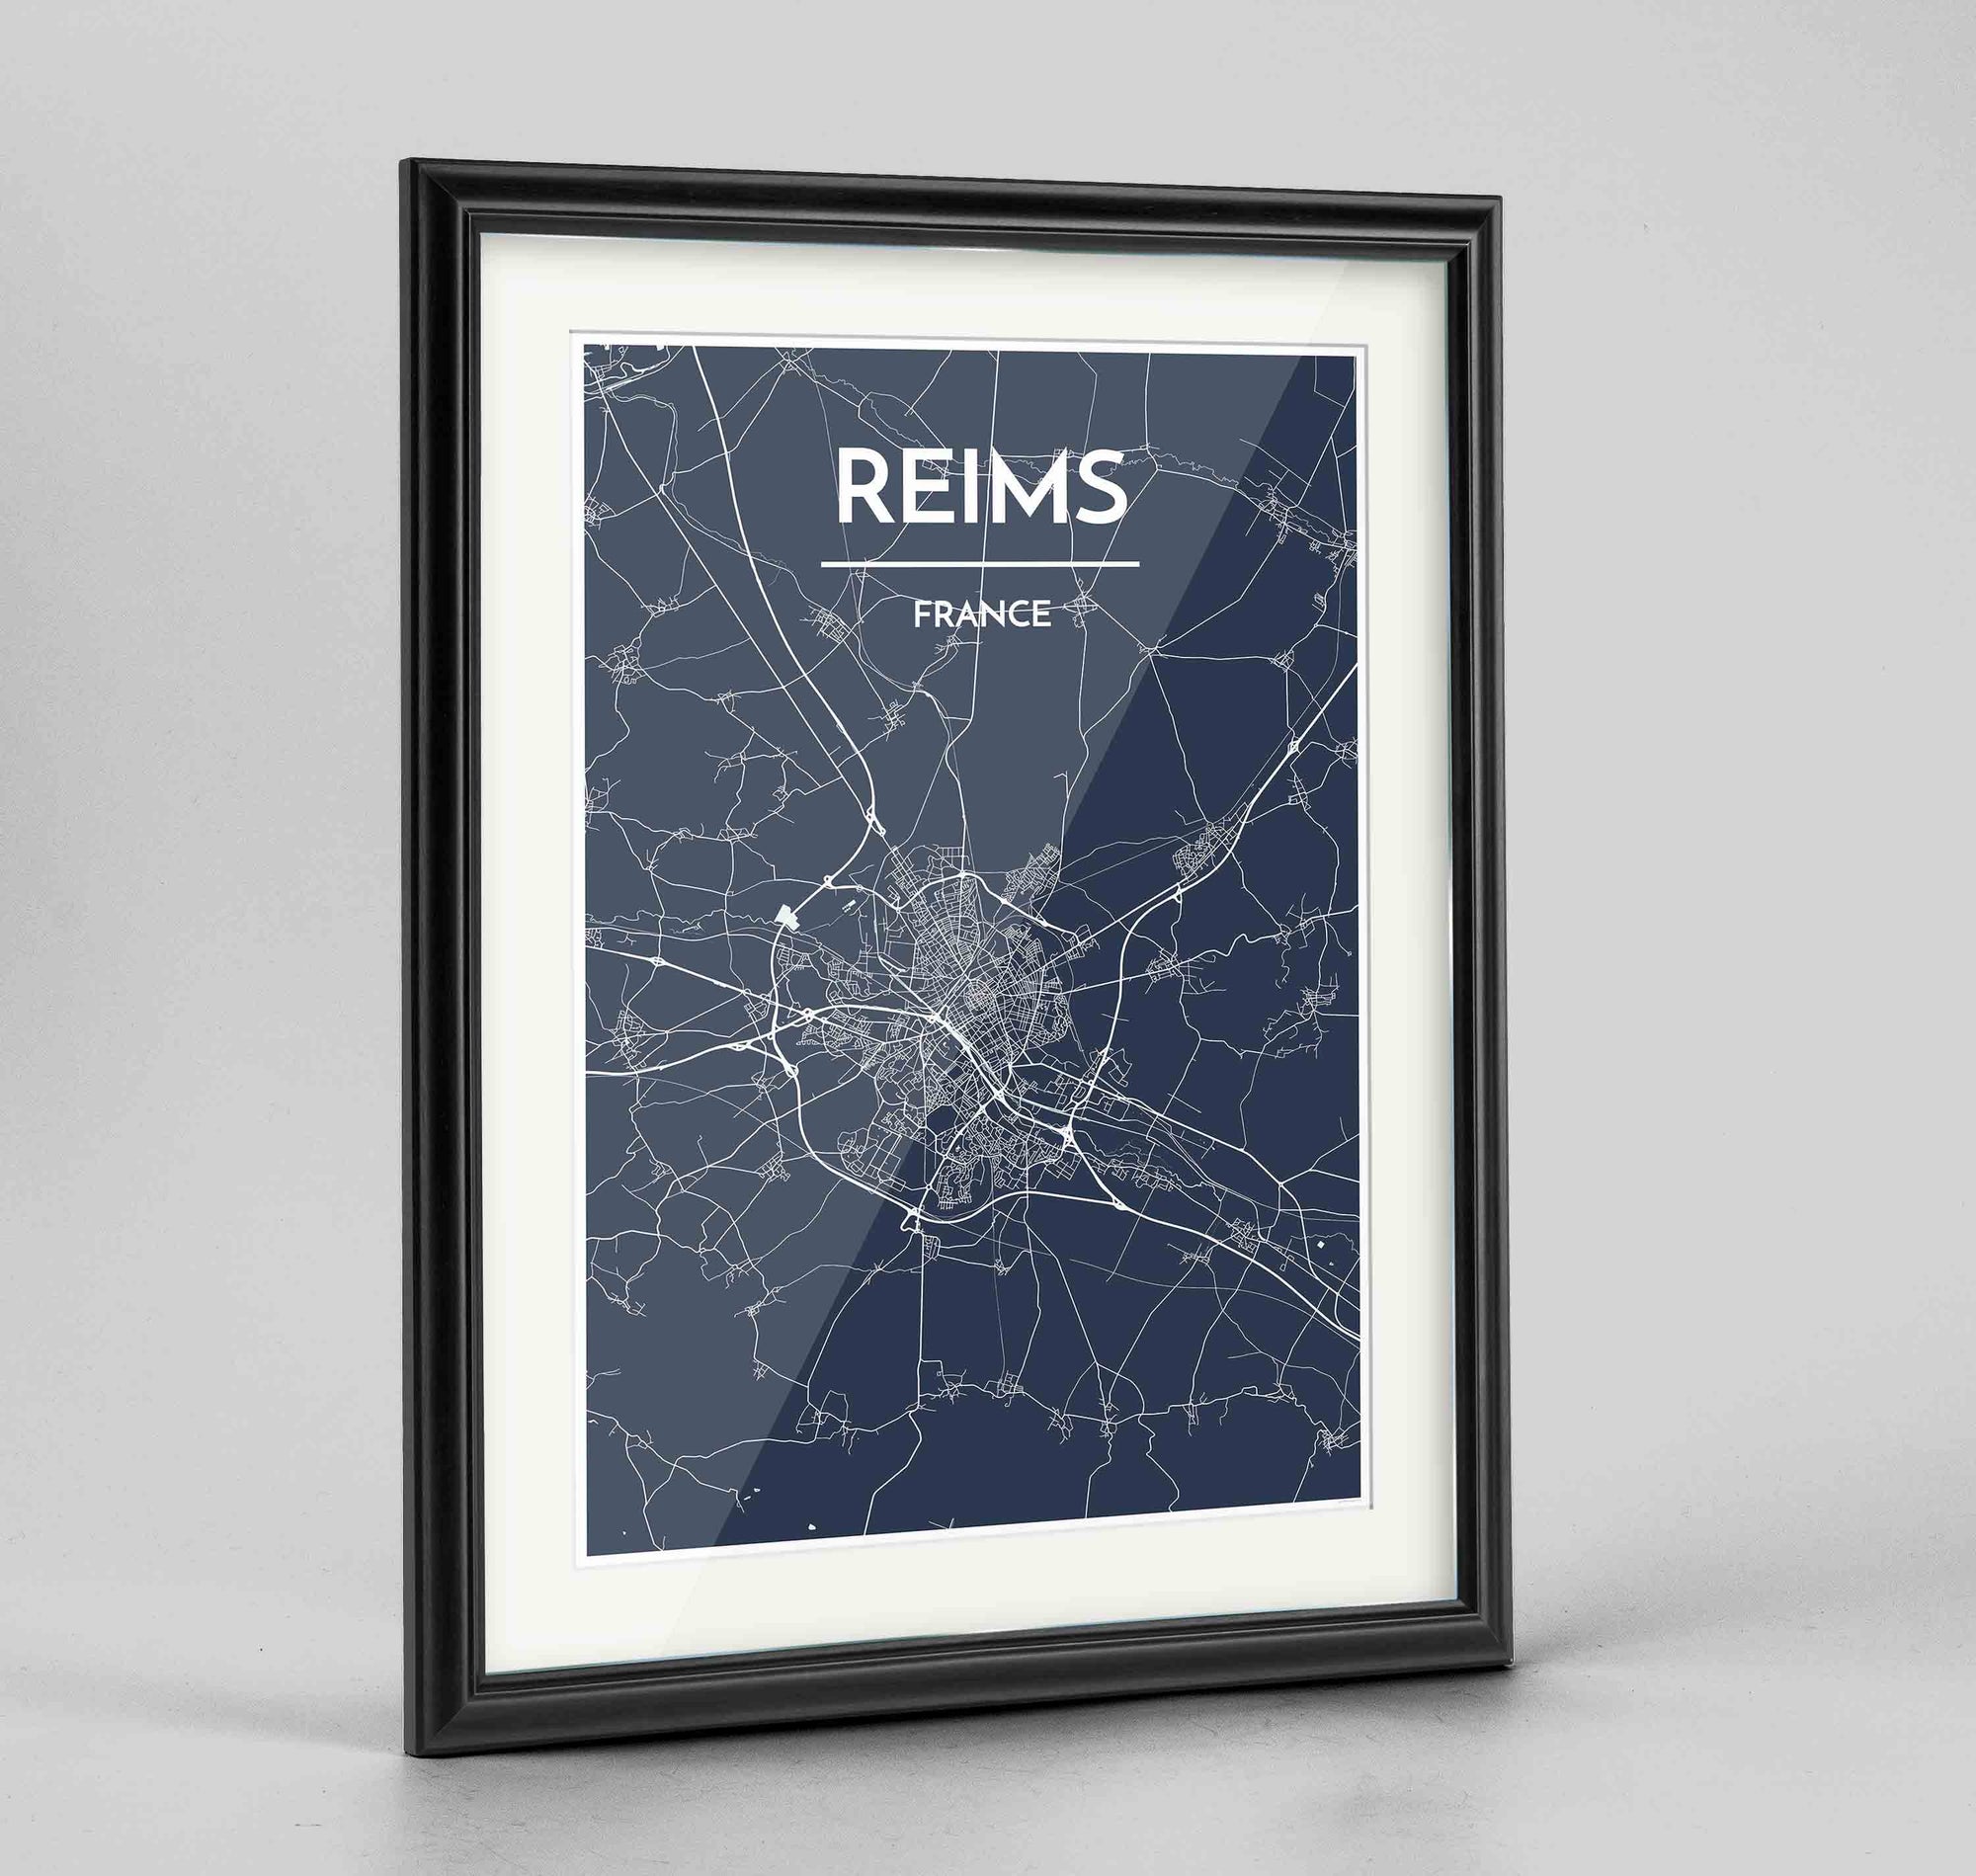 Framed Reims Map Art Print 24x36" Traditional Black frame Point Two Design Group